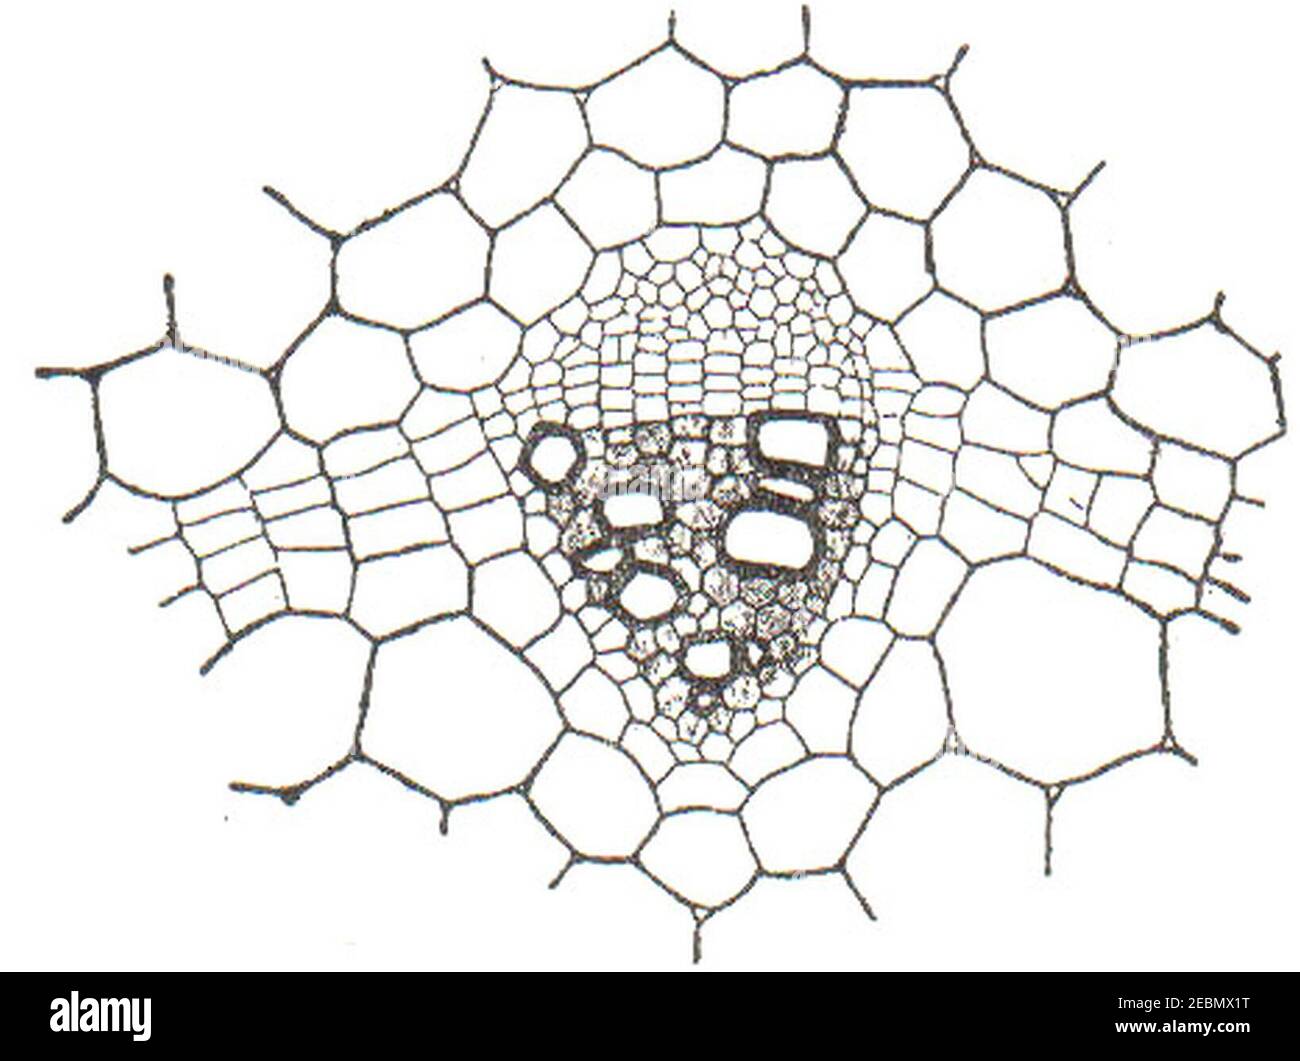 NSRW A Collateral Vascular Bundle. Stock Photo